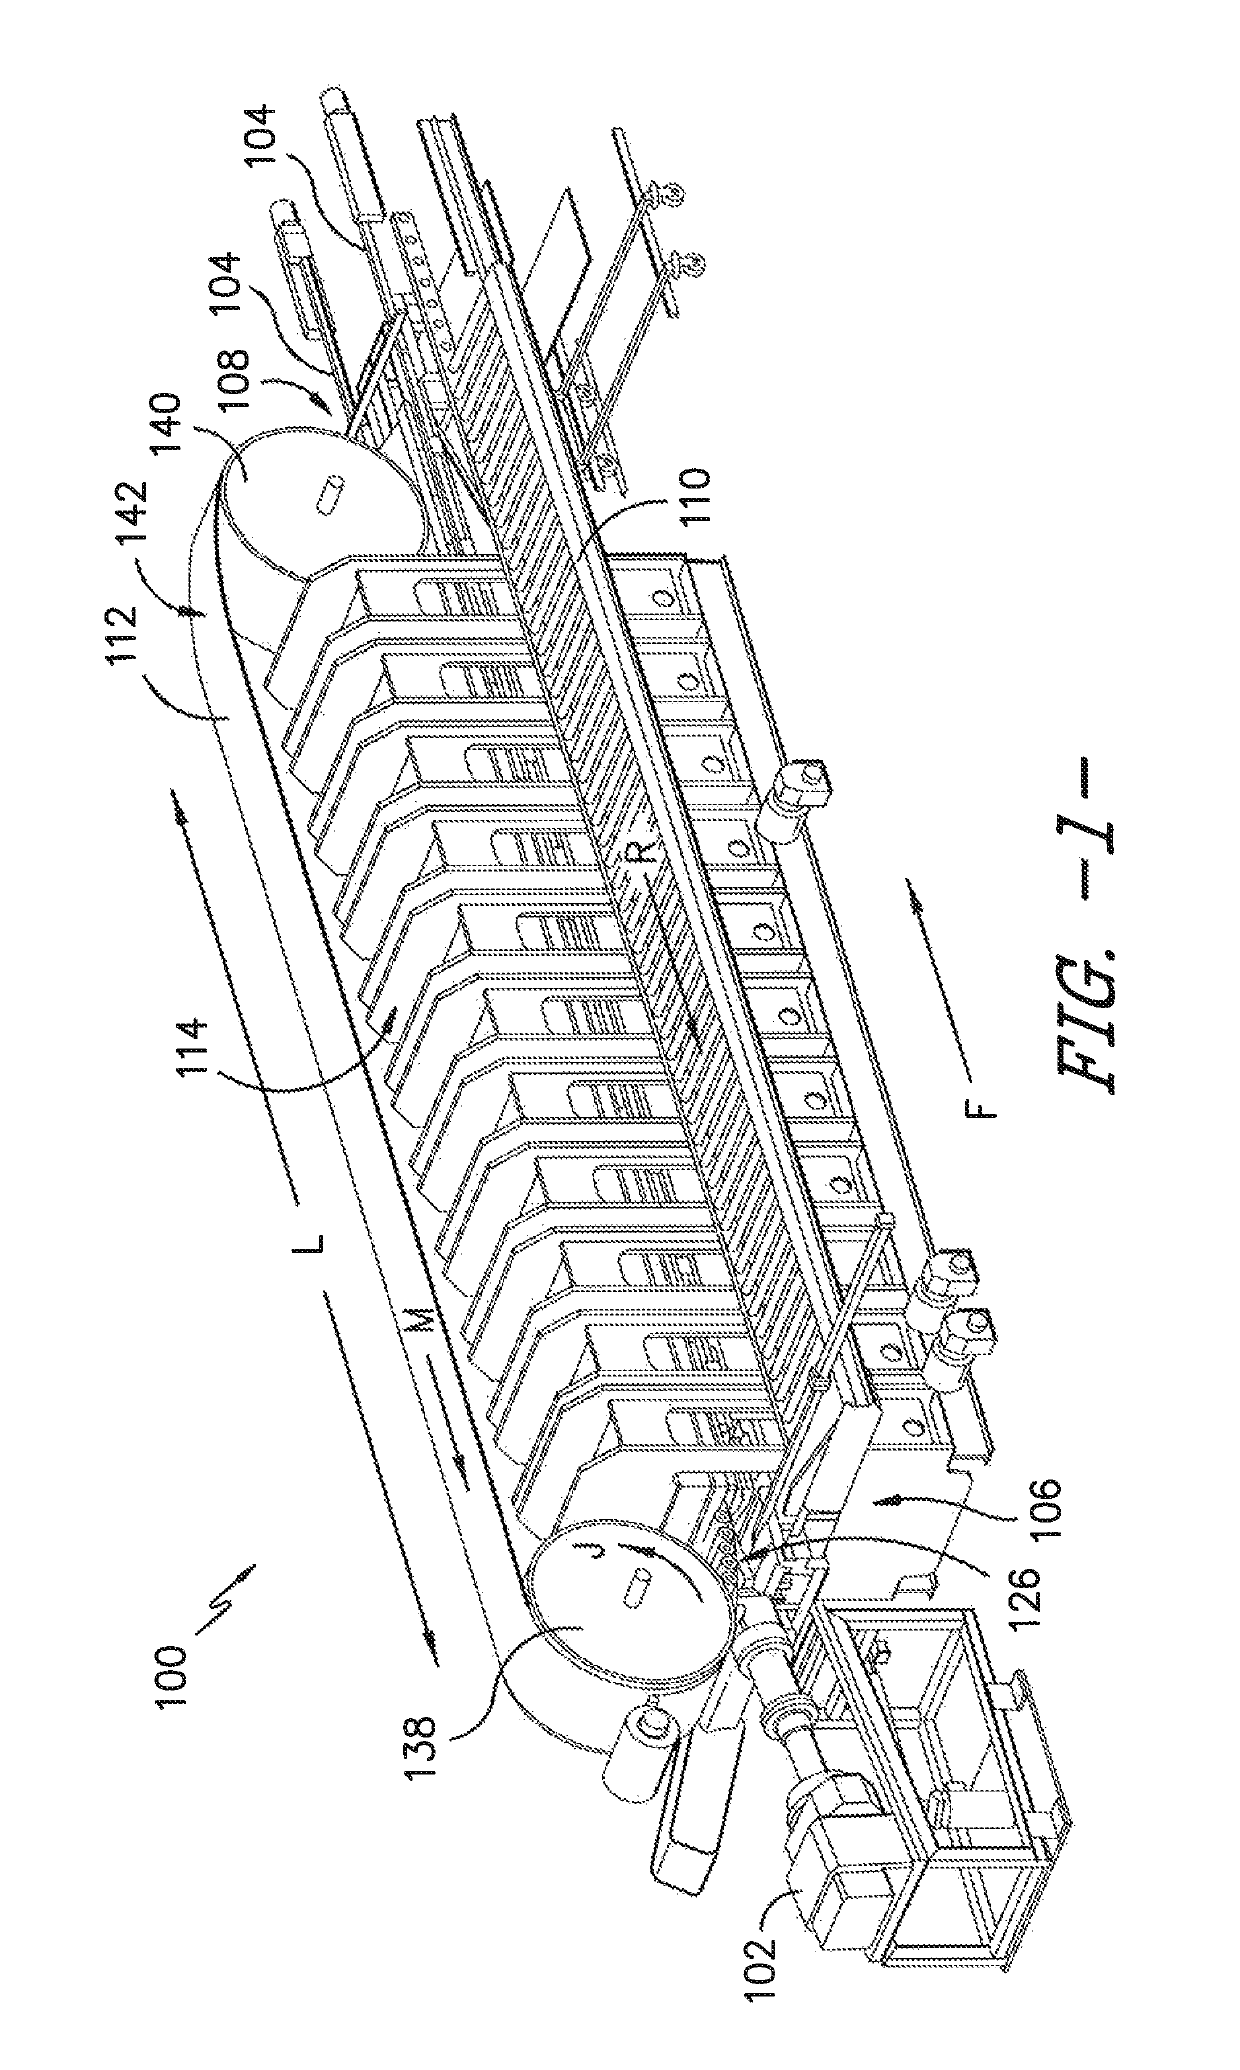 System for continuous tire tread extrusion, molding, and curing